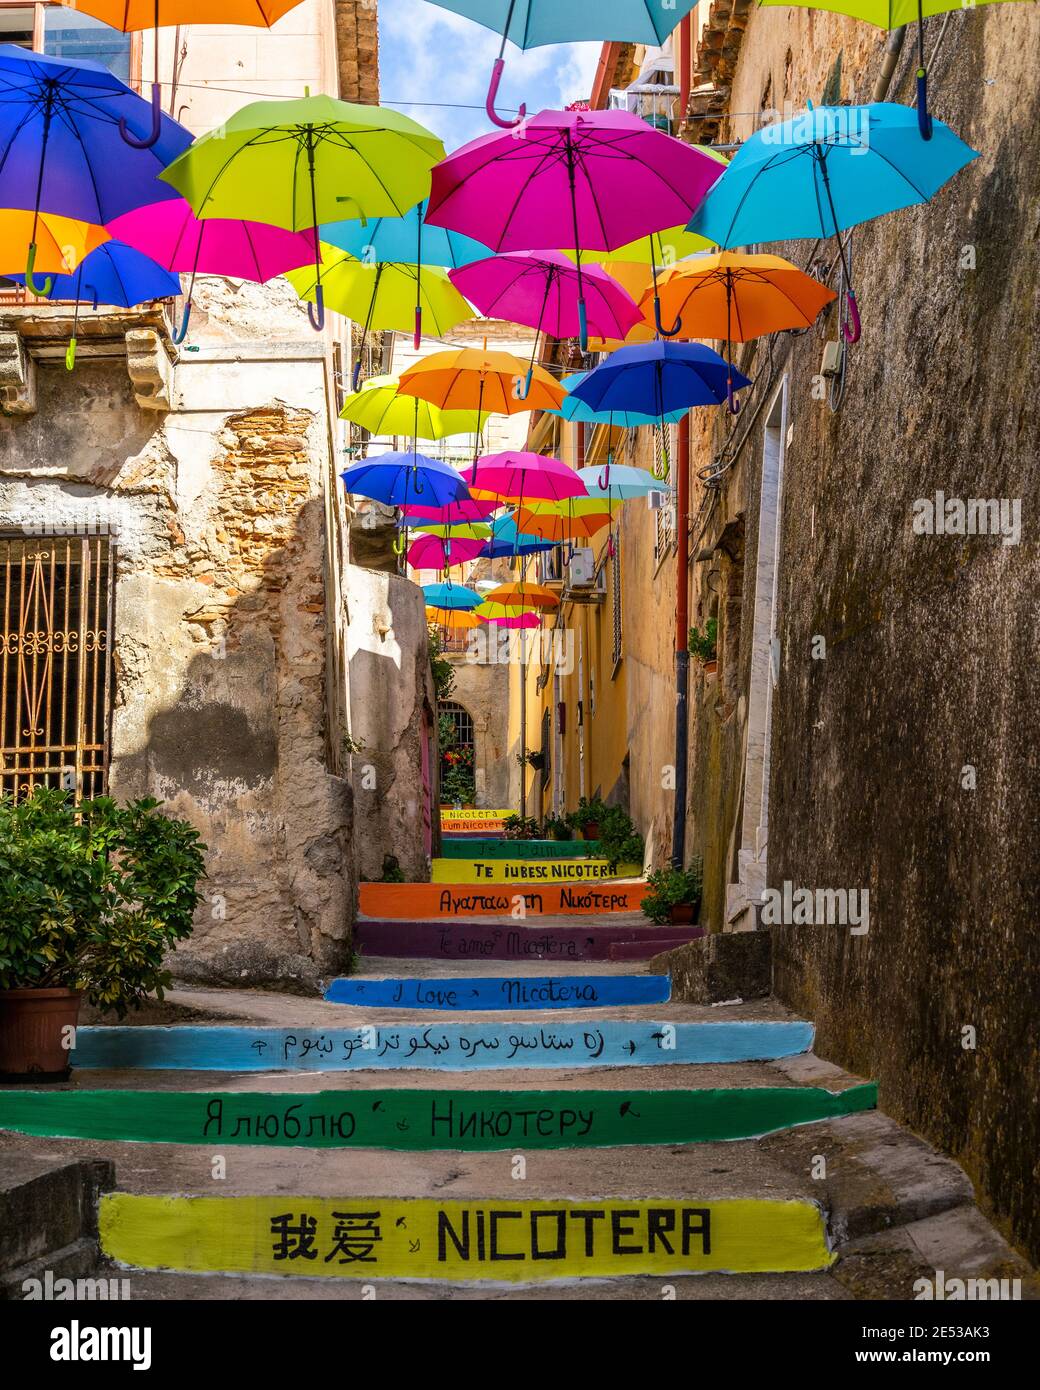 Typical narrow street with colorful floating umbrellas in Nicotera, Calabria, Italy Stock Photo